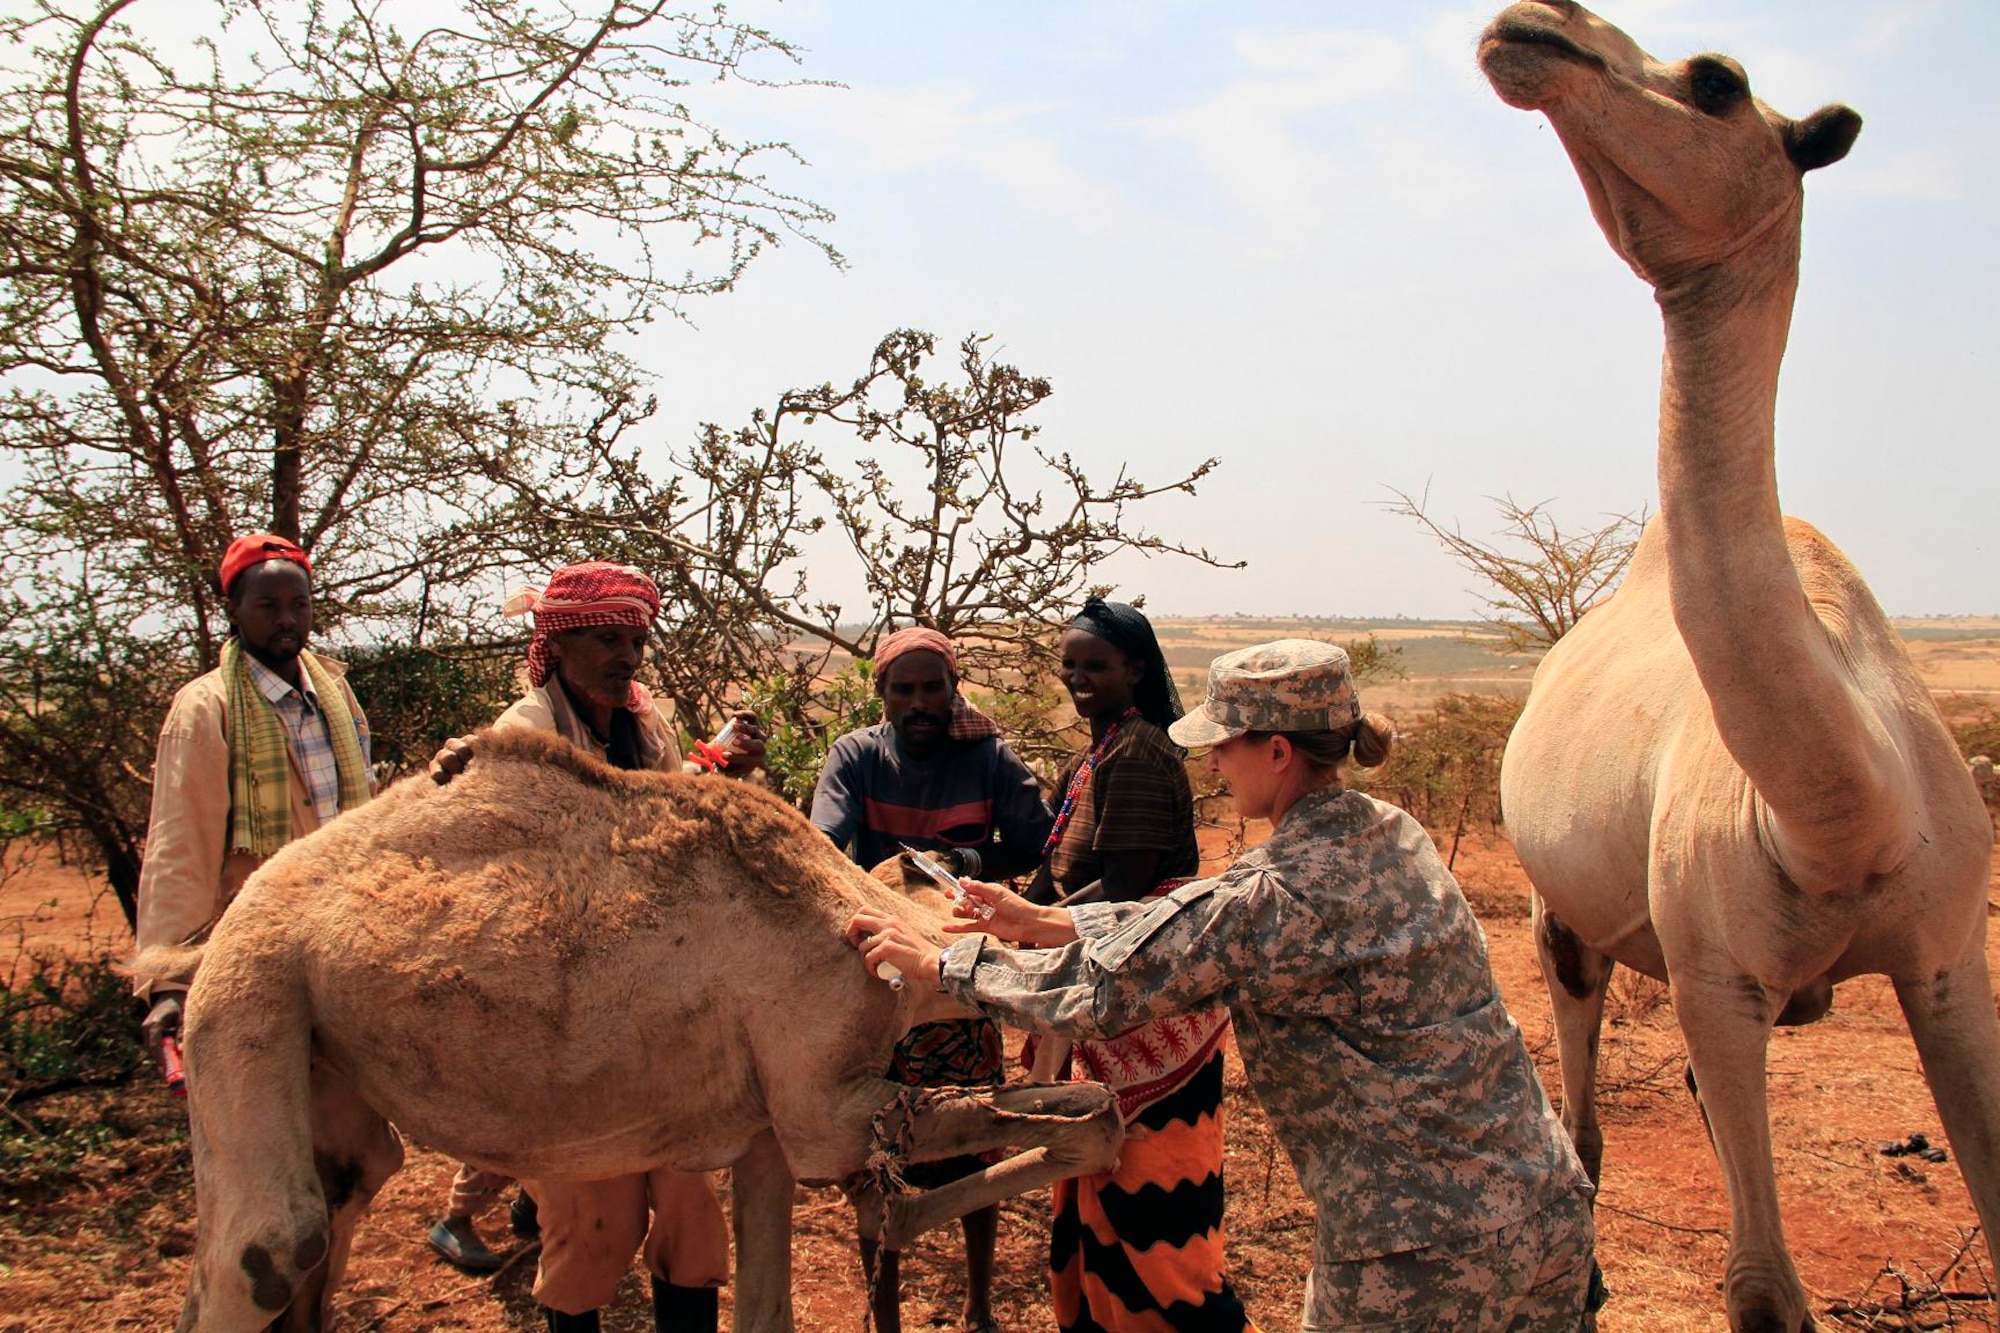 U.S. Army CPT Jill Lynn, the 490th Civil Affairs Battalion functional specialty team veterinarian,  and Community Animal Health Worker Mohammed Isaq, second from the left, work together to treat a young camel during an eight  day Veterinary Civic Action Program in Negele, Ethiopia August 23, 2011.  More than 25 thousand chickens, cattle, camels and donkeys received multi-vitamin injections and treatments for various parasitic diseases. (U.S. Air Force photo by Capt Jennifer Pearson)